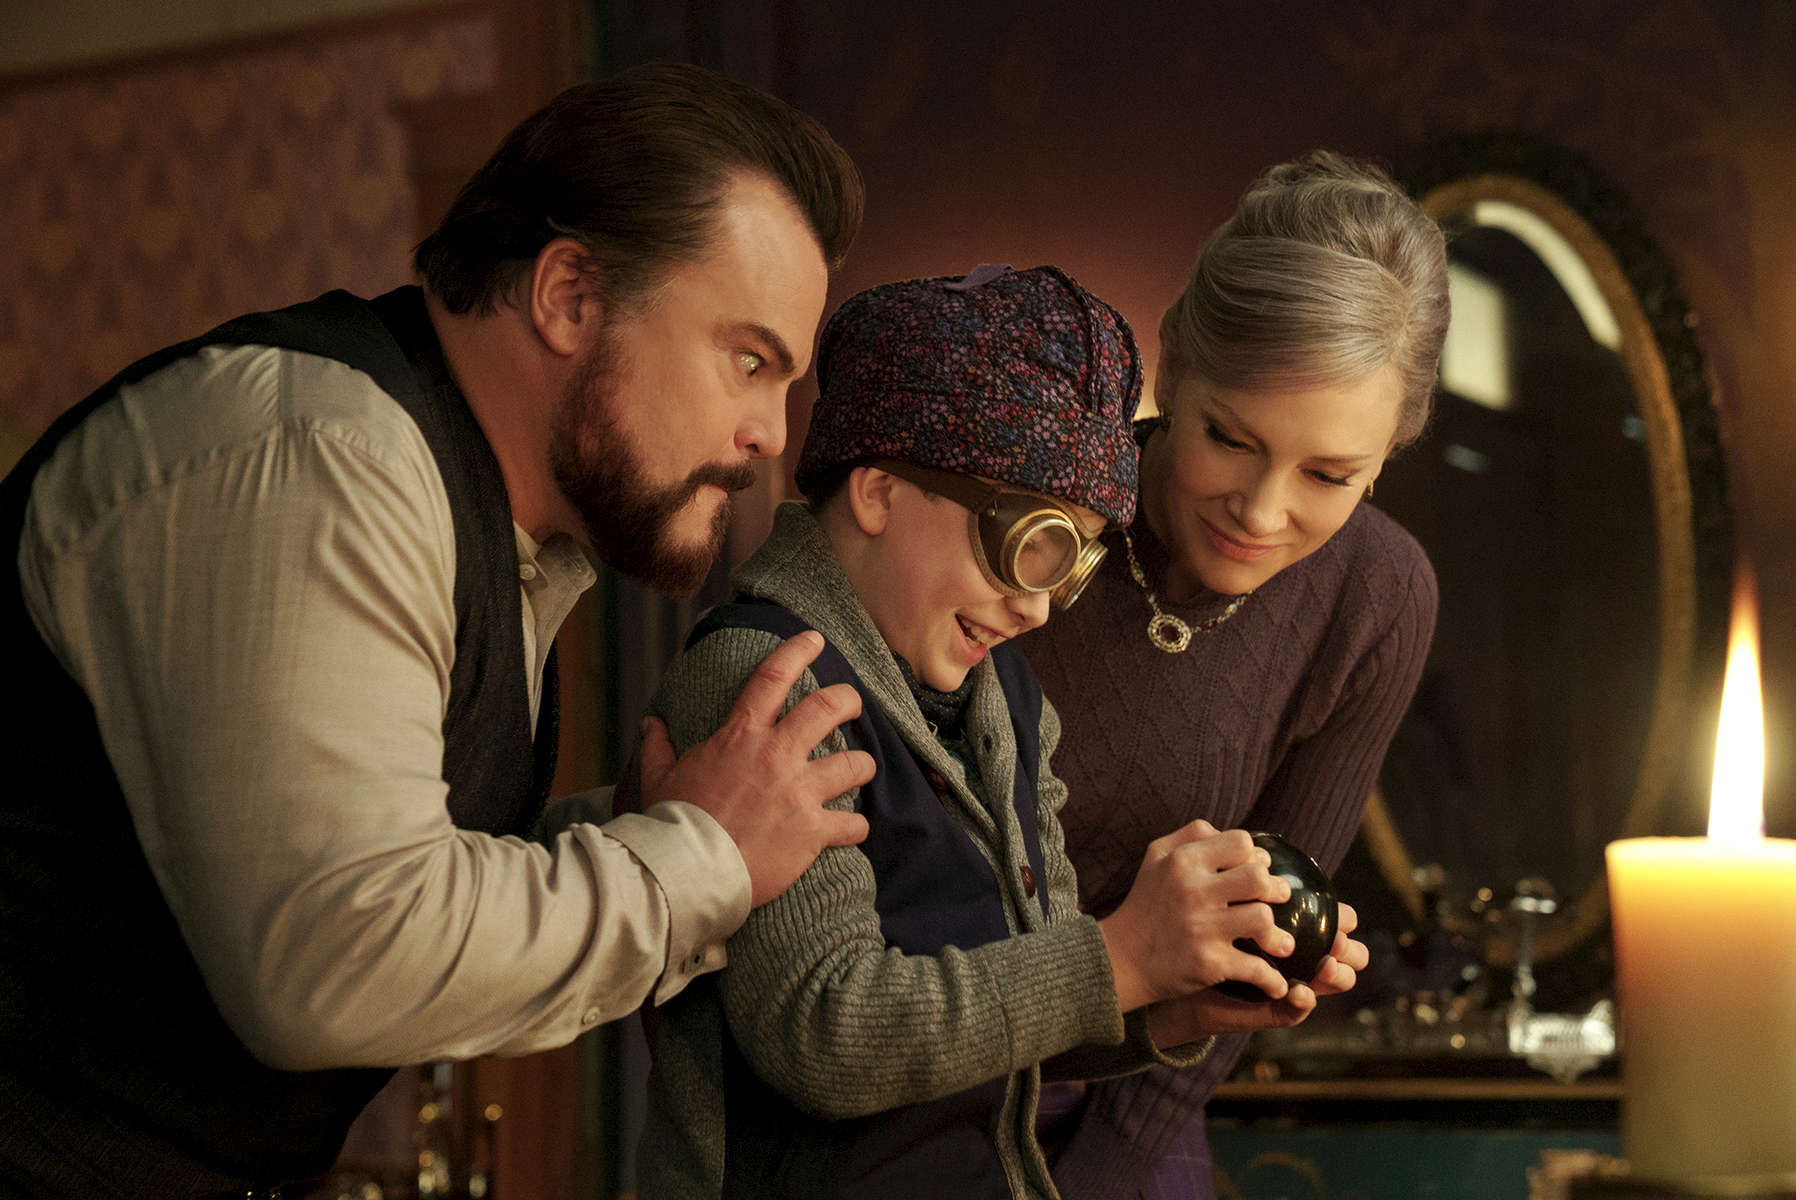 (L to R) JACK BLACK, OWEN VACCARO and CATE BLANCHETT star in The House with a Clock in Its Walls, from Amblin Entertainment.  The magical adventure tells the spine-tingling tale of 10-year-old Lewis (Vaccaro) who goes to live with his uncle (Black) in a creaky old house with a mysterious tick-tocking heart.  But his new town’s sleepy façade jolts to life with a secret world of warlocks and witches when Lewis accidentally awakens the dead.